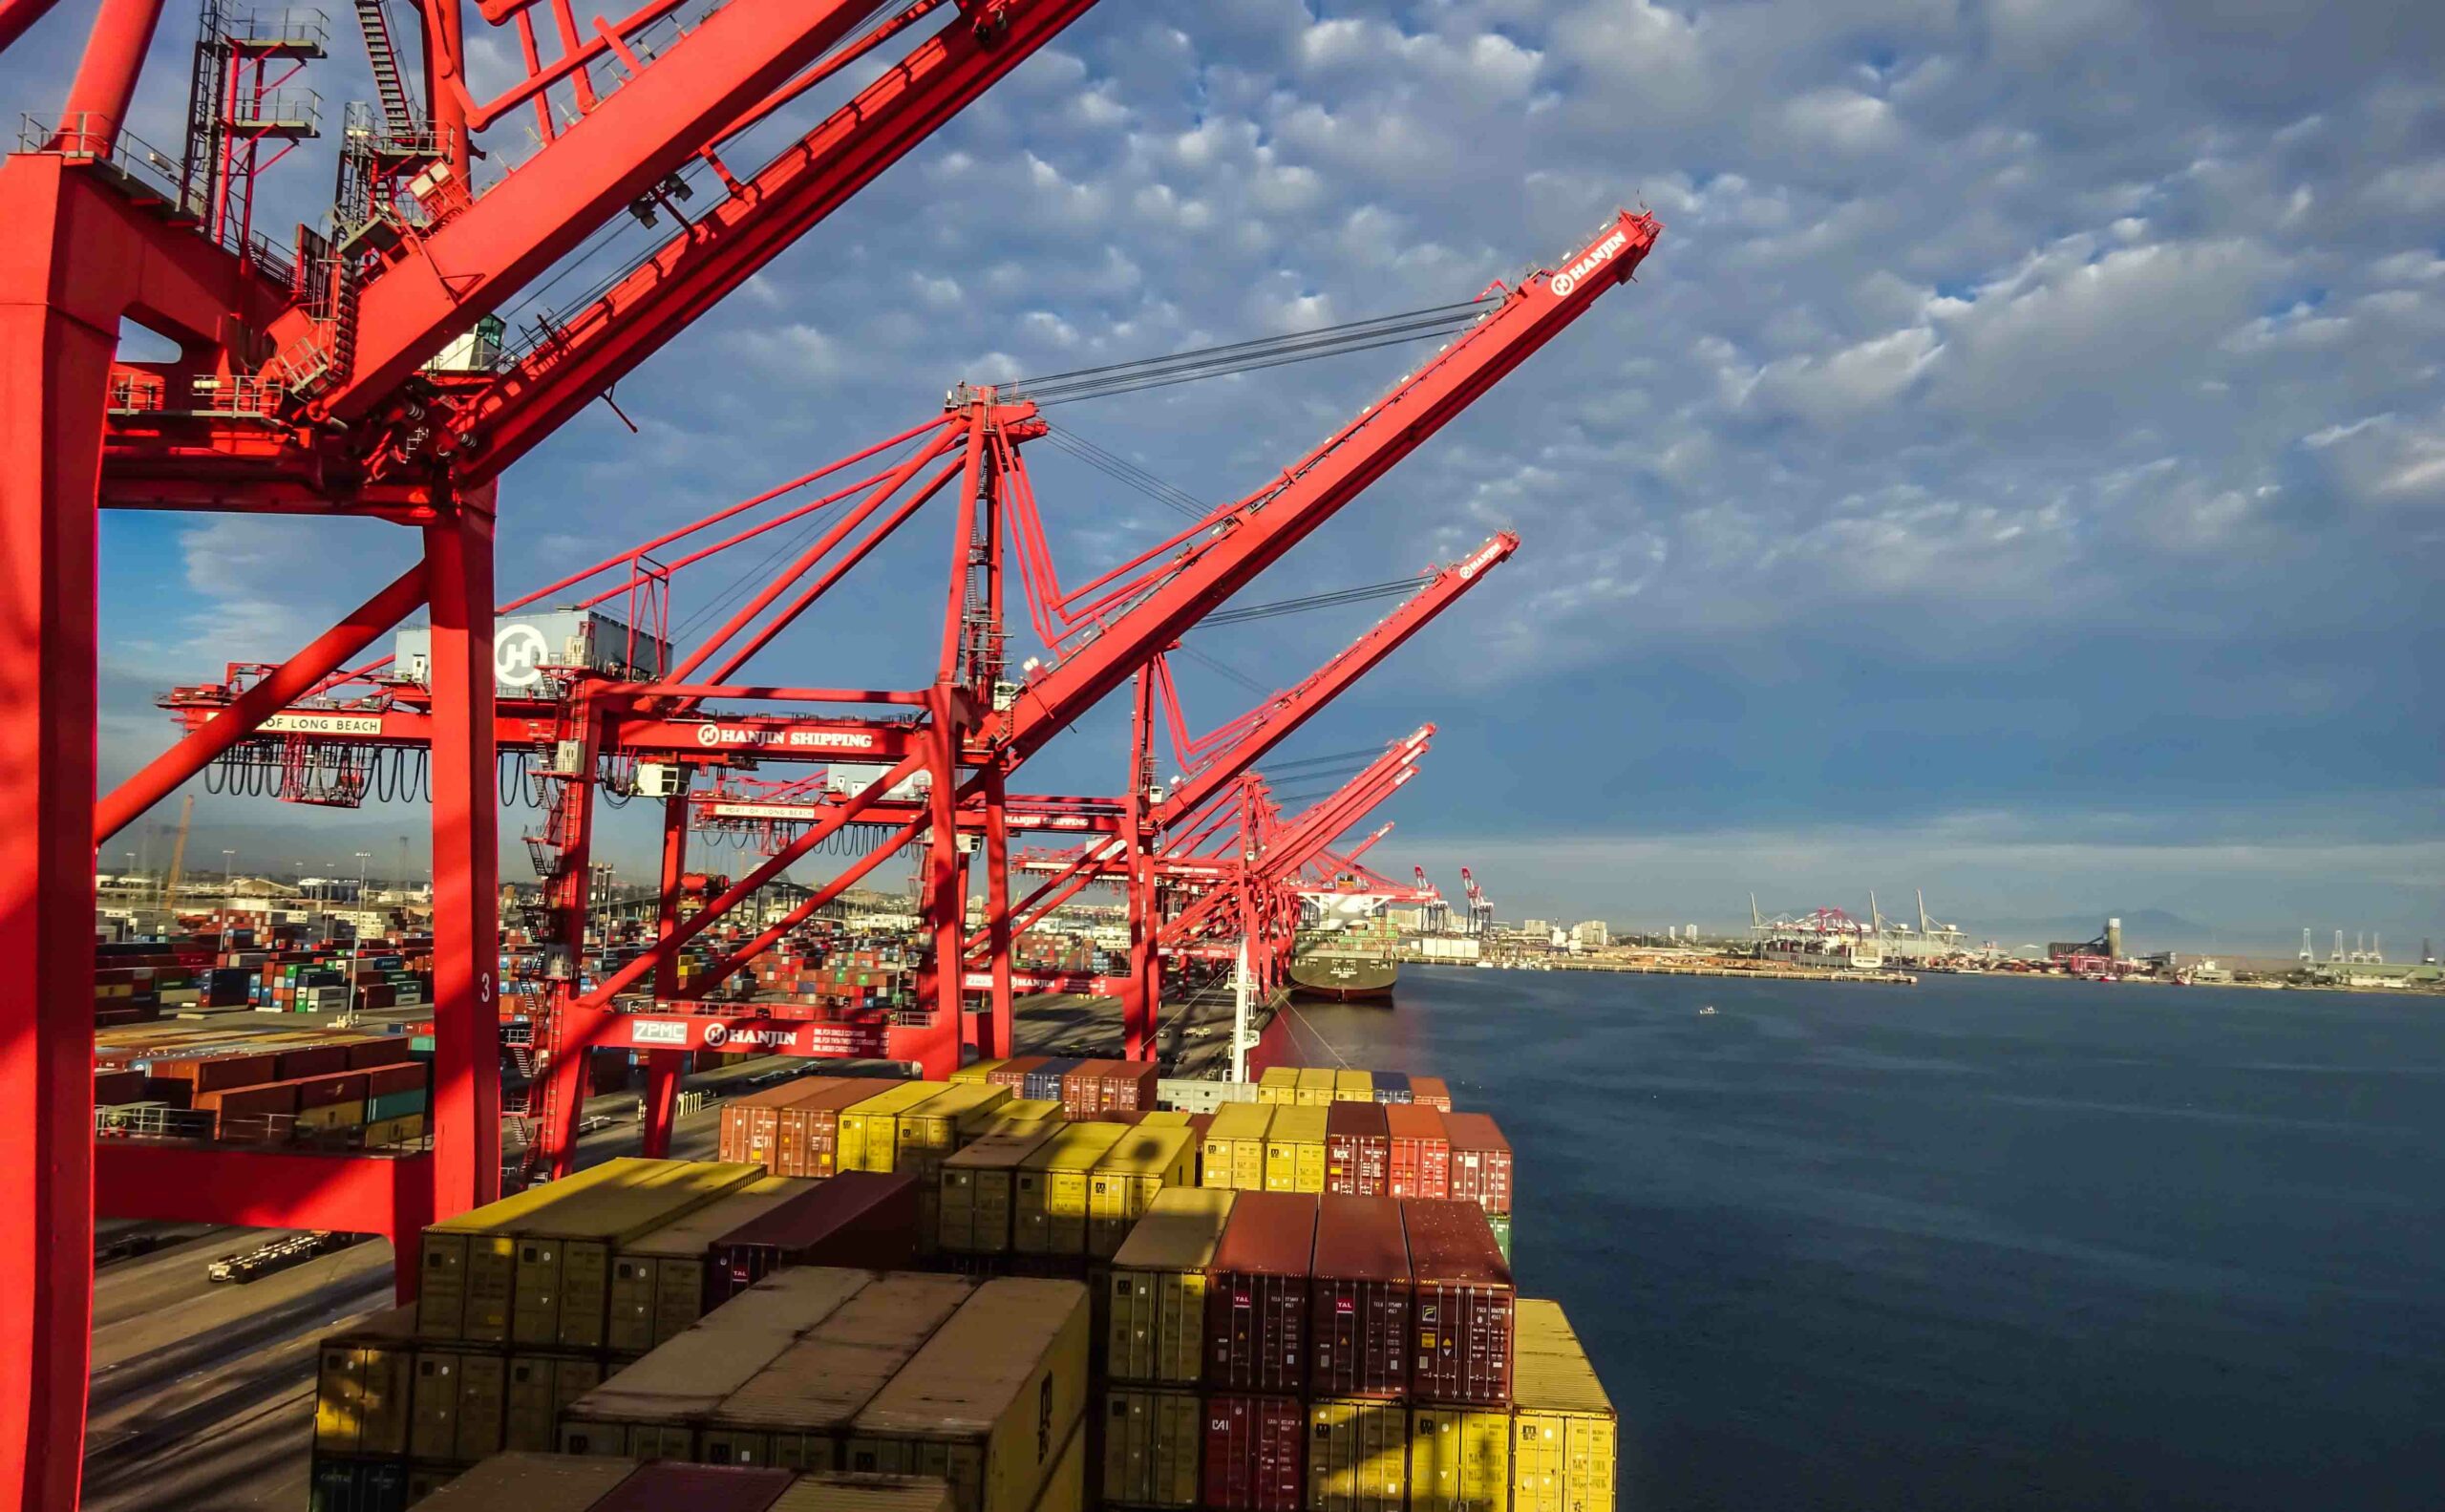 The Los Angeles Harbor Commission puts the container dwell fee on hold 1